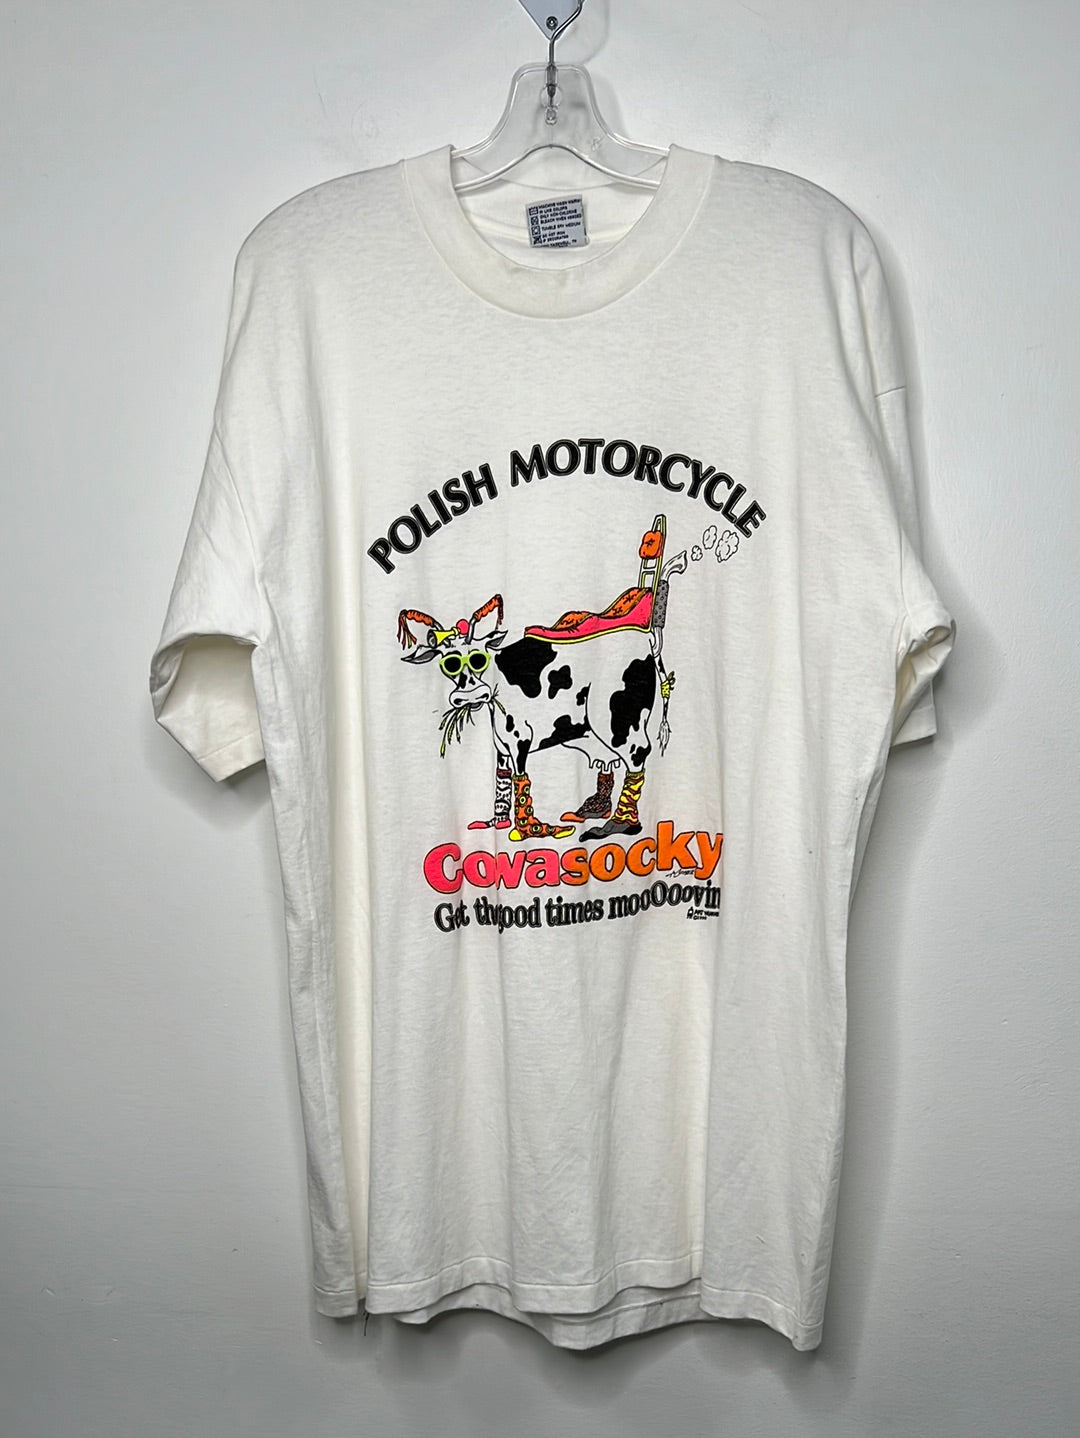 Vintage Polish Motorcycle Cowasocky Get The Good Times Mooooovin Art Wearables 1990 Made in USA Graphic T-Shirt (XL)